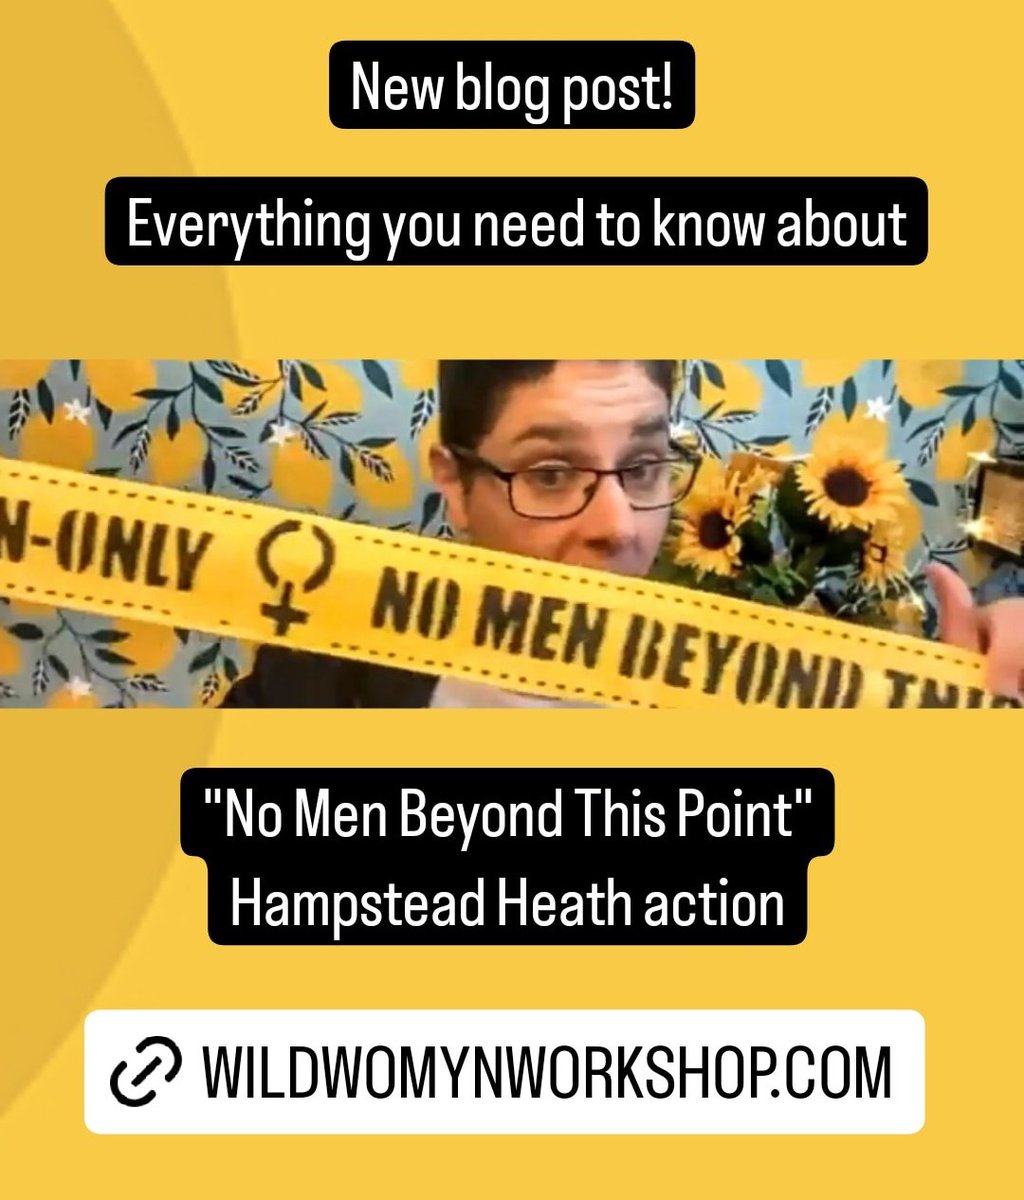 New blog post!! Everything you need to know about the #nomenbeyondthispoint Hampstead Heath action! wildwomynworkshop.com/women-only-no-…